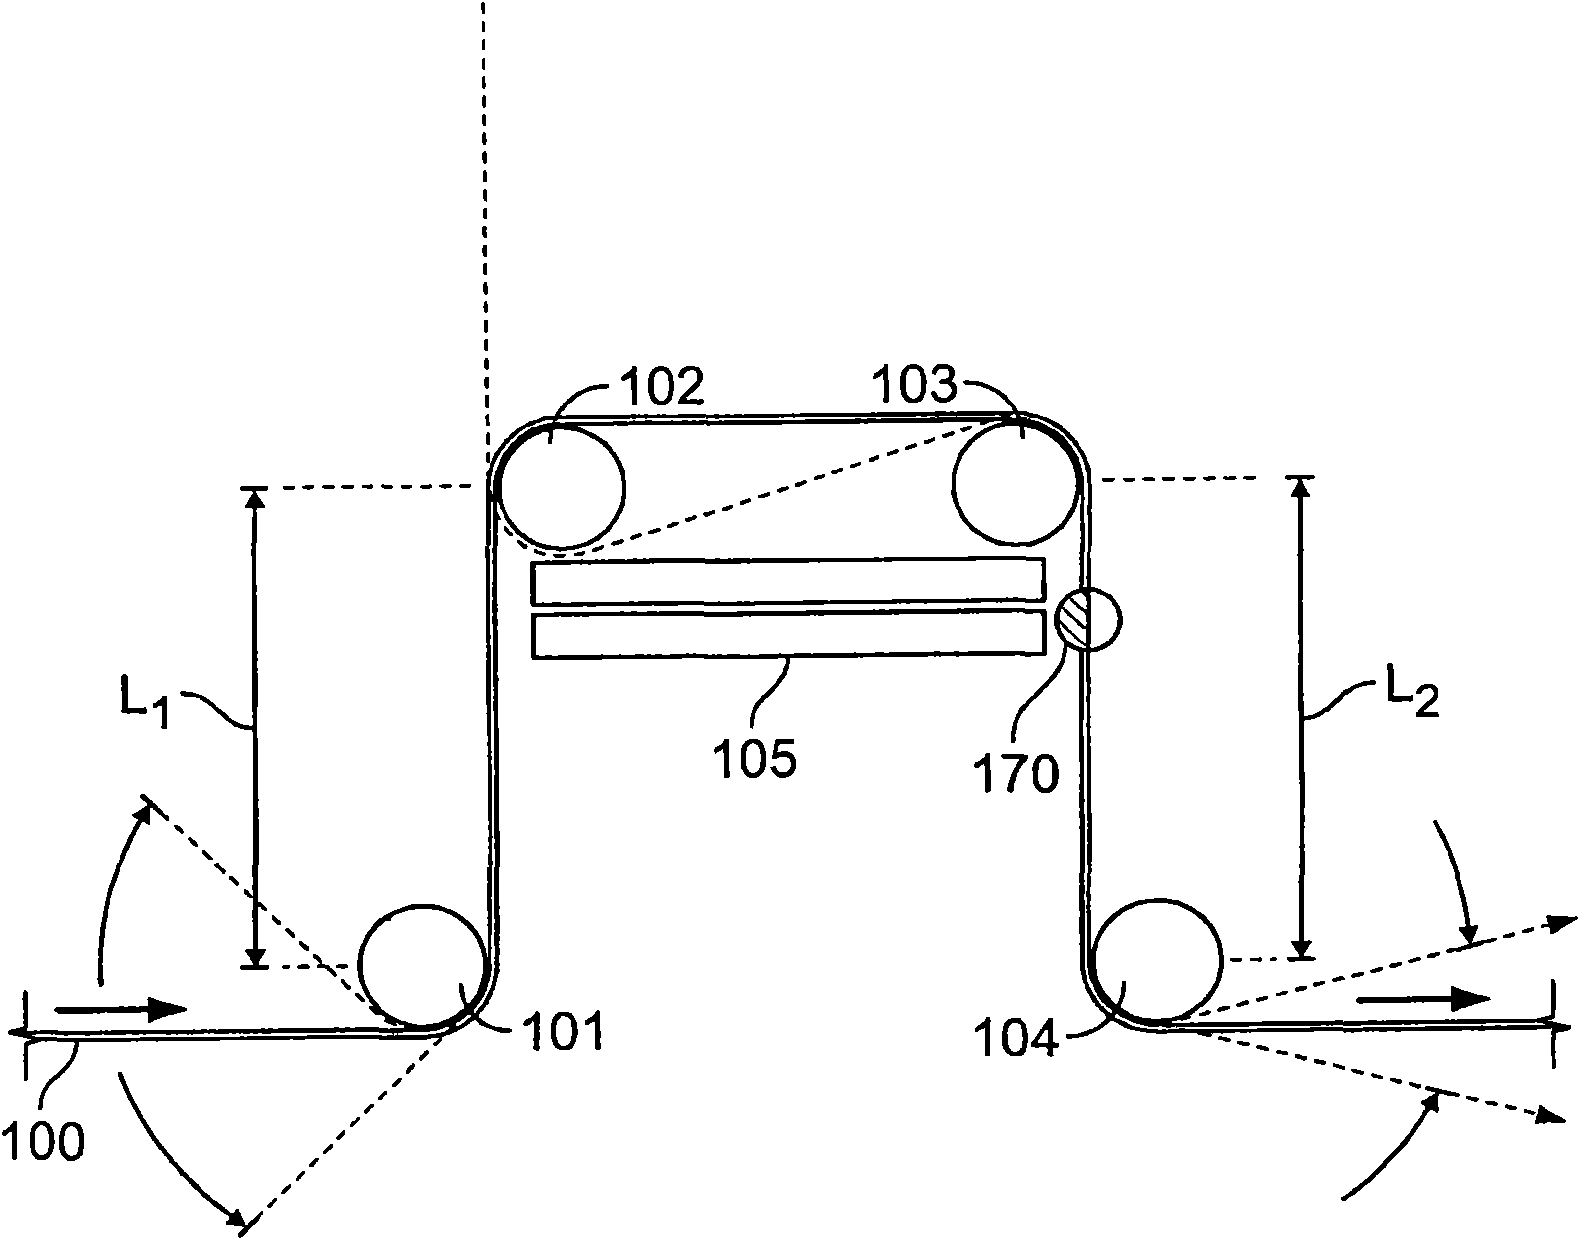 Method and device for detecting orientation characteristics on a web of material